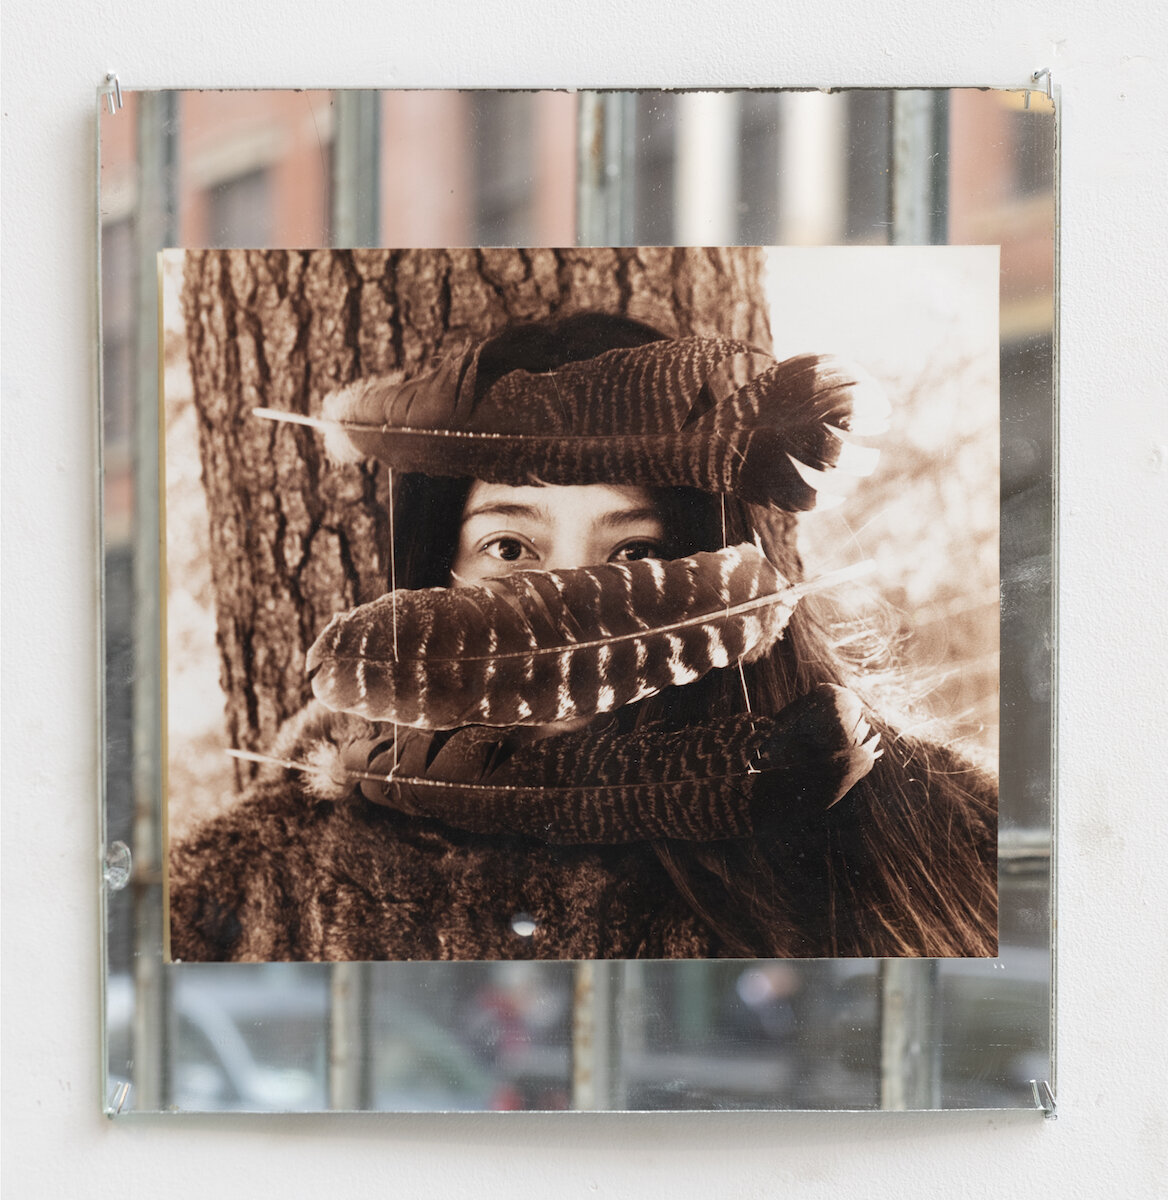   Feather Mask , 2002, sepia-toned photograph on mirror, 11.5 x 11.5 in, Image courtesy of the Sol LeWitt Collection 